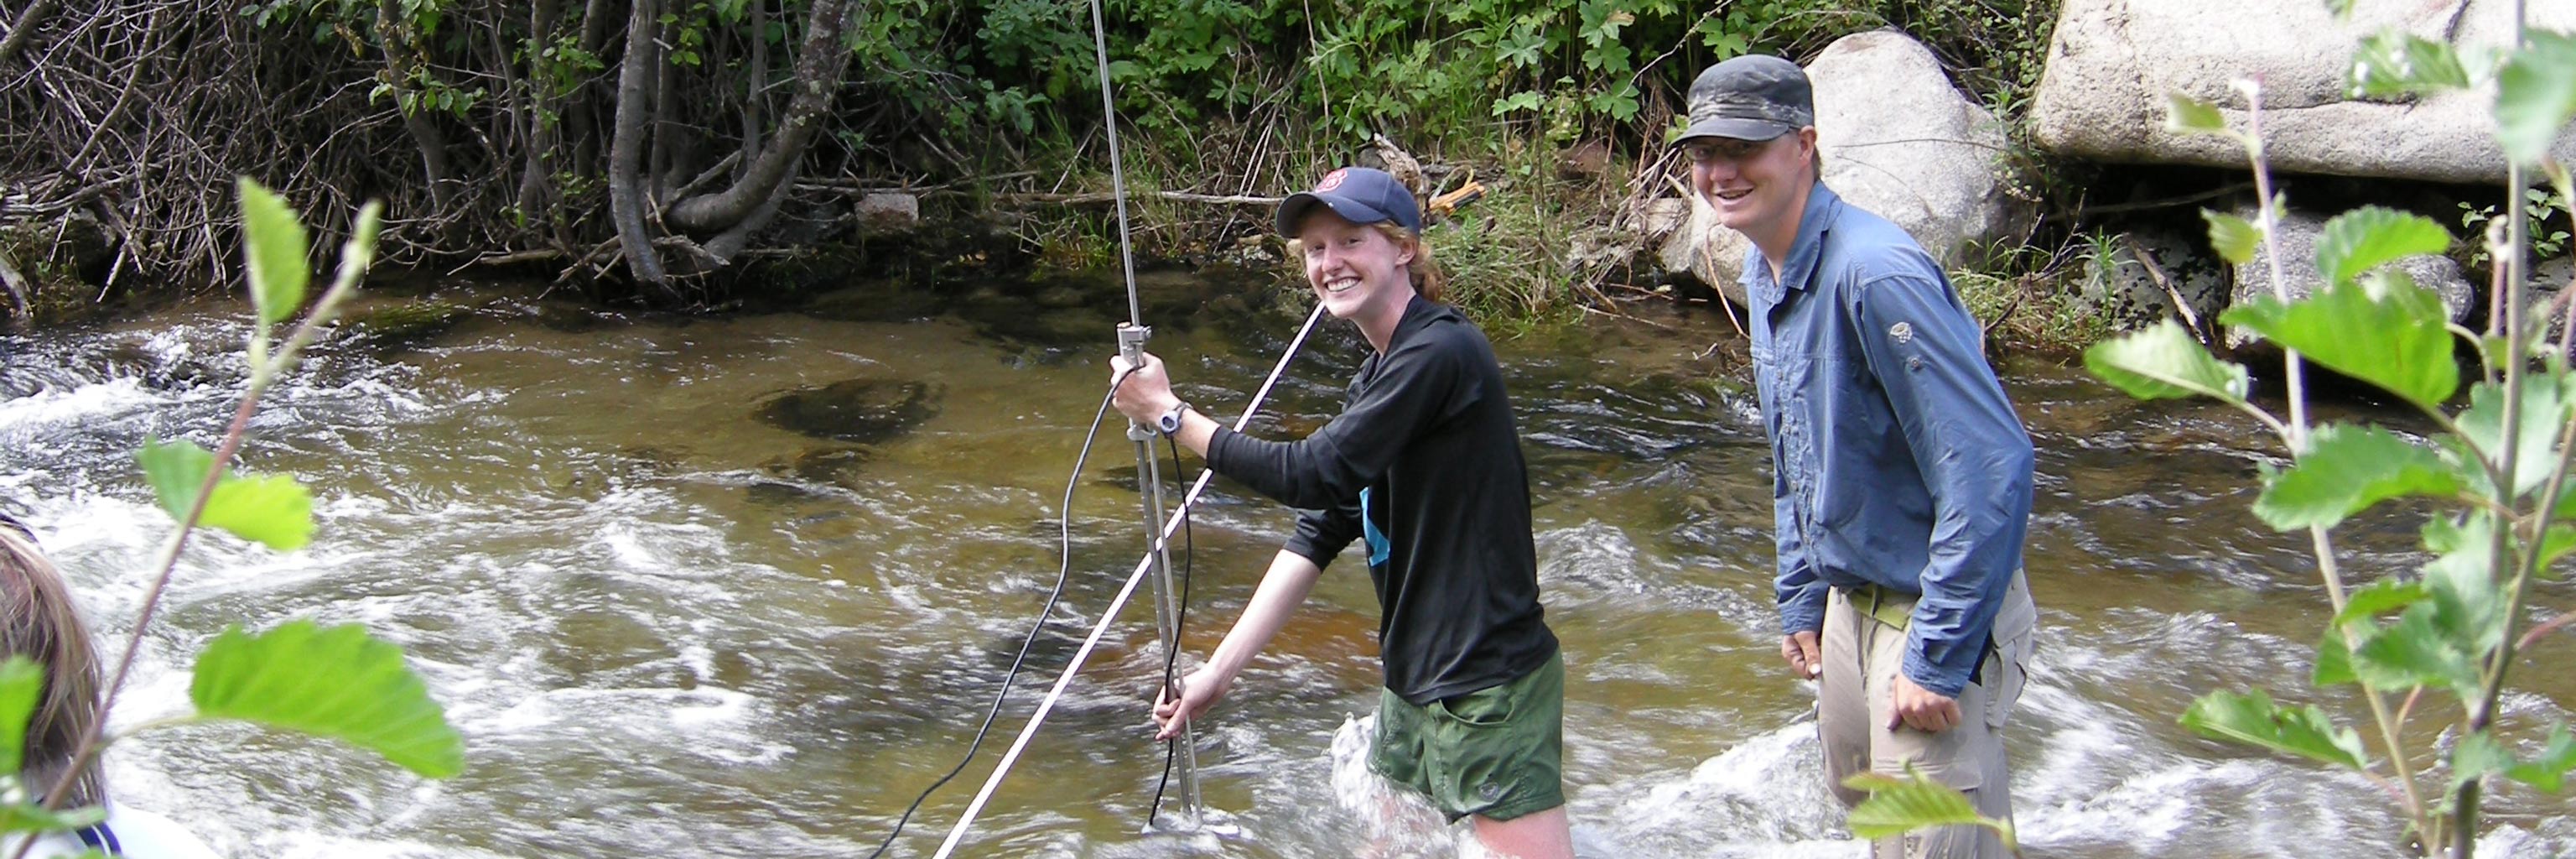 Students performing fieldwork in a stream